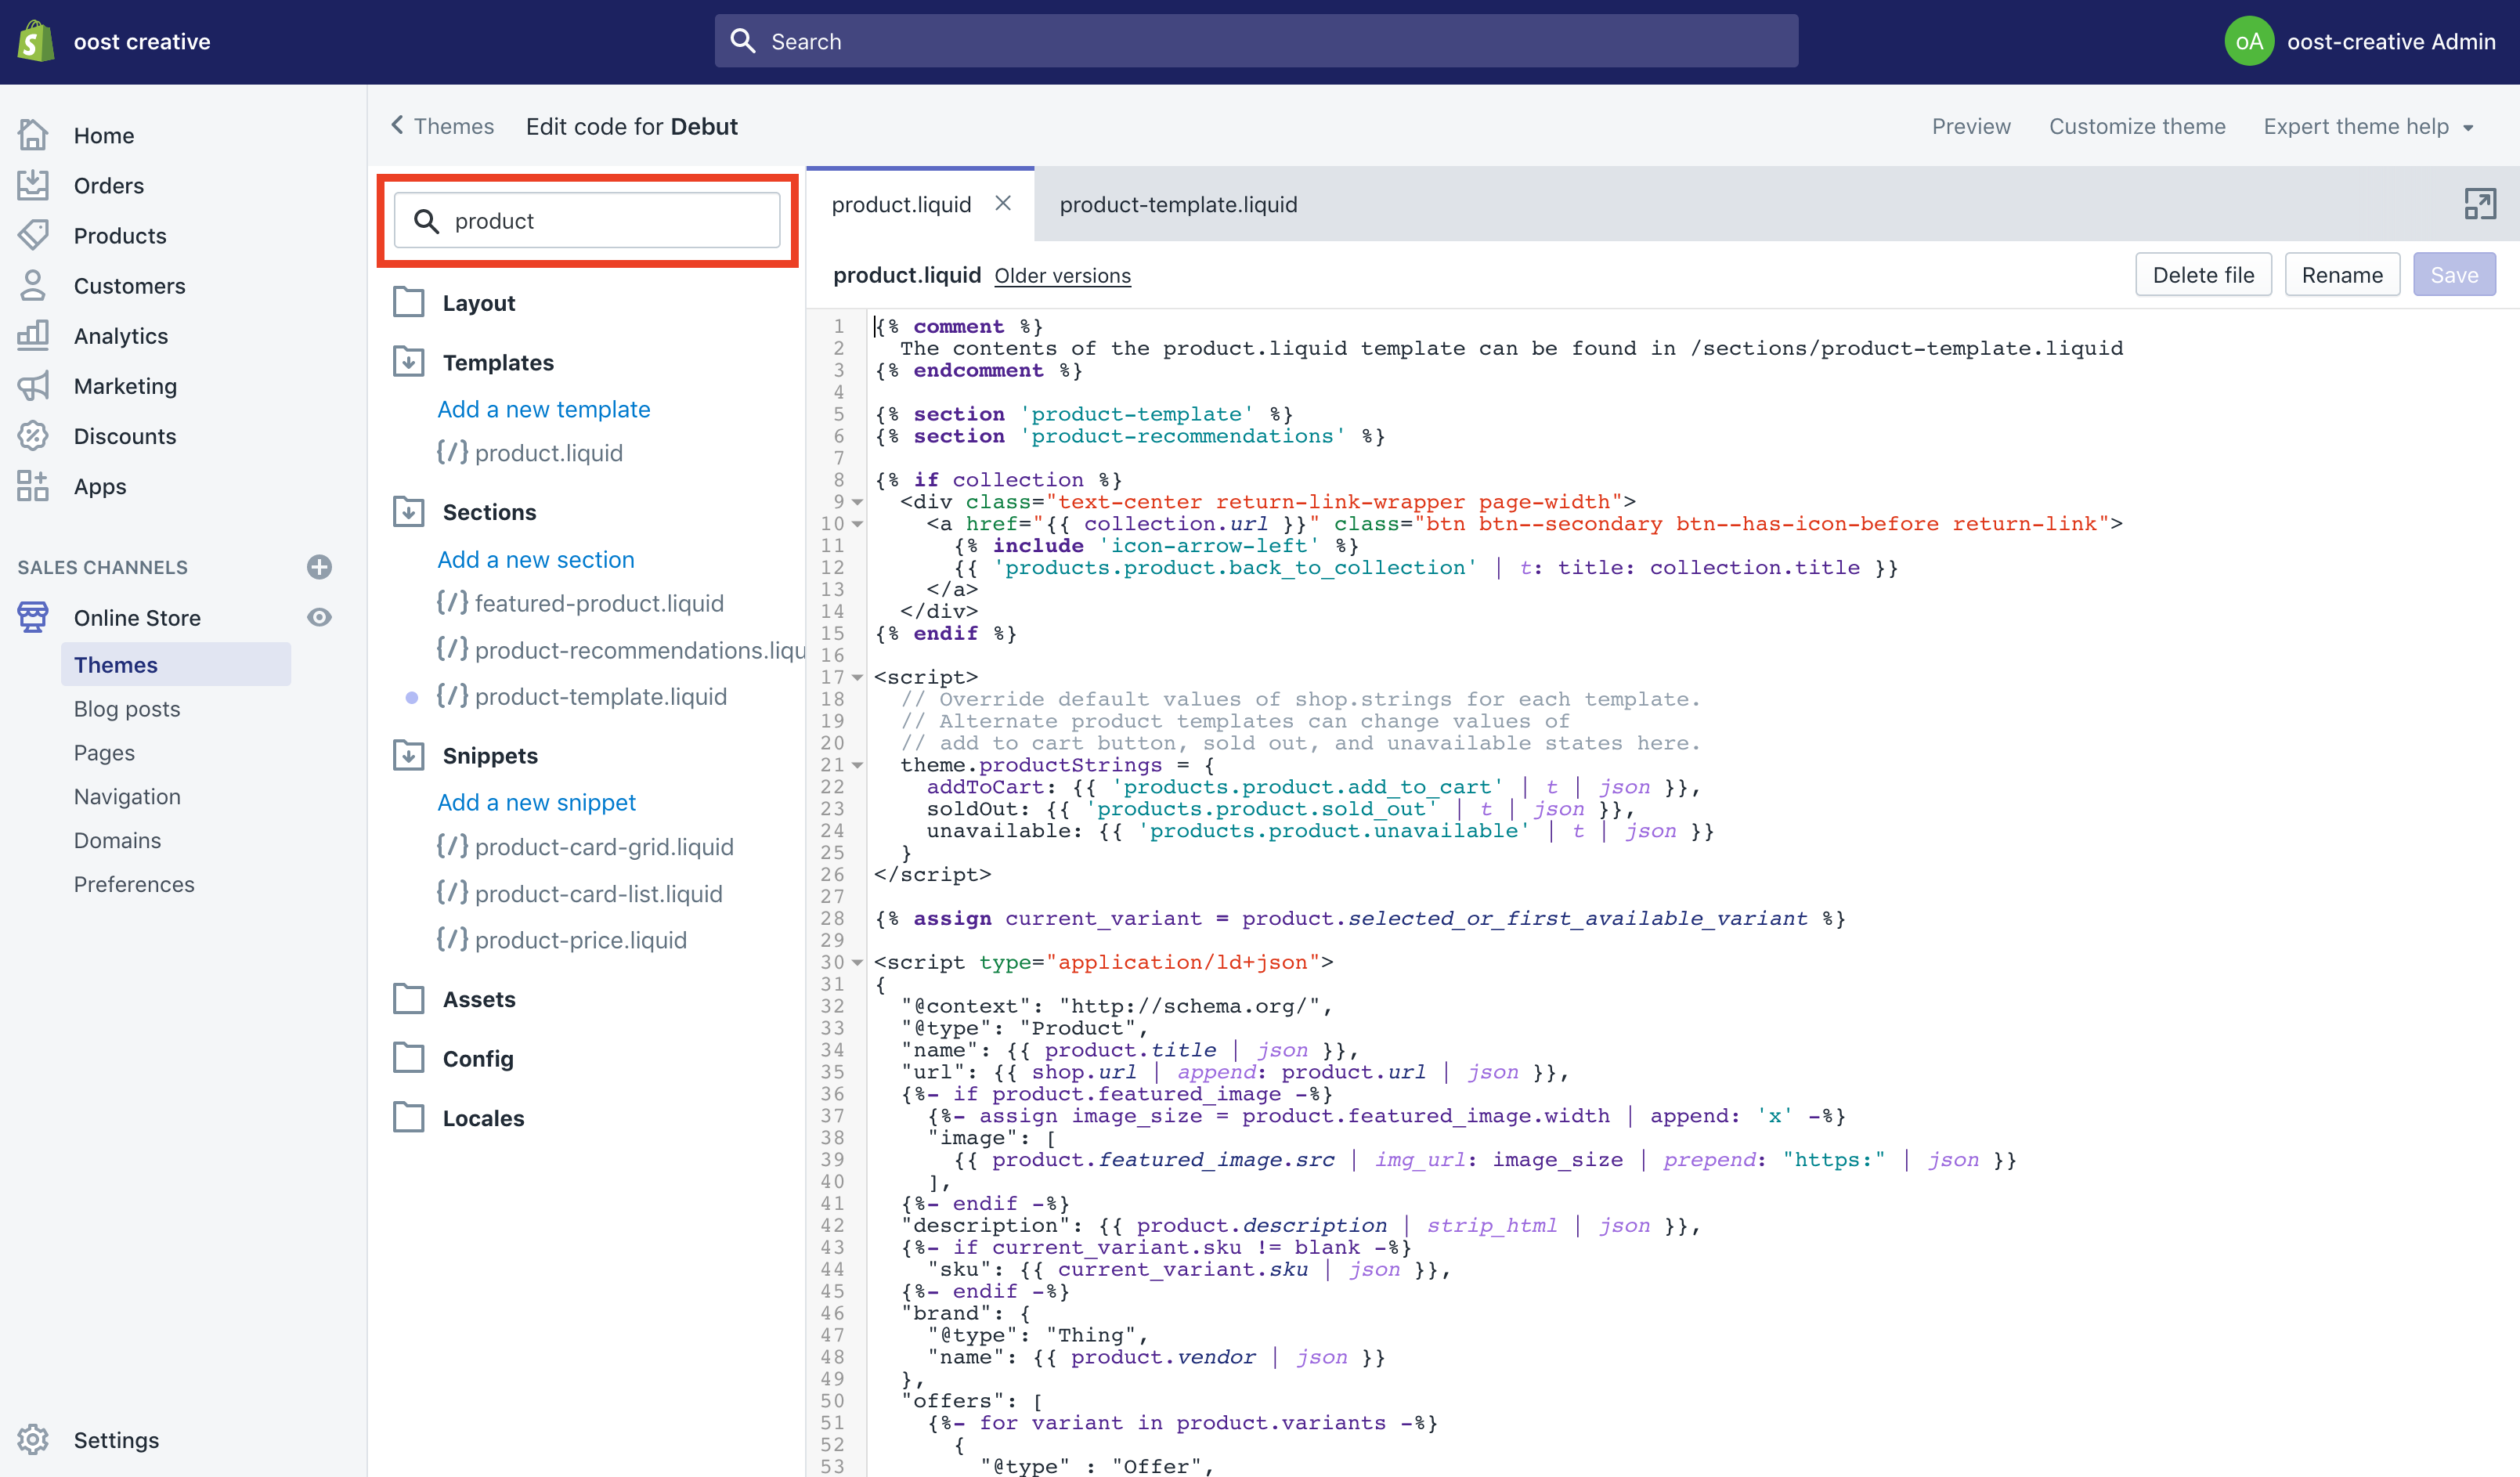 Shopify admin page showing the code editor